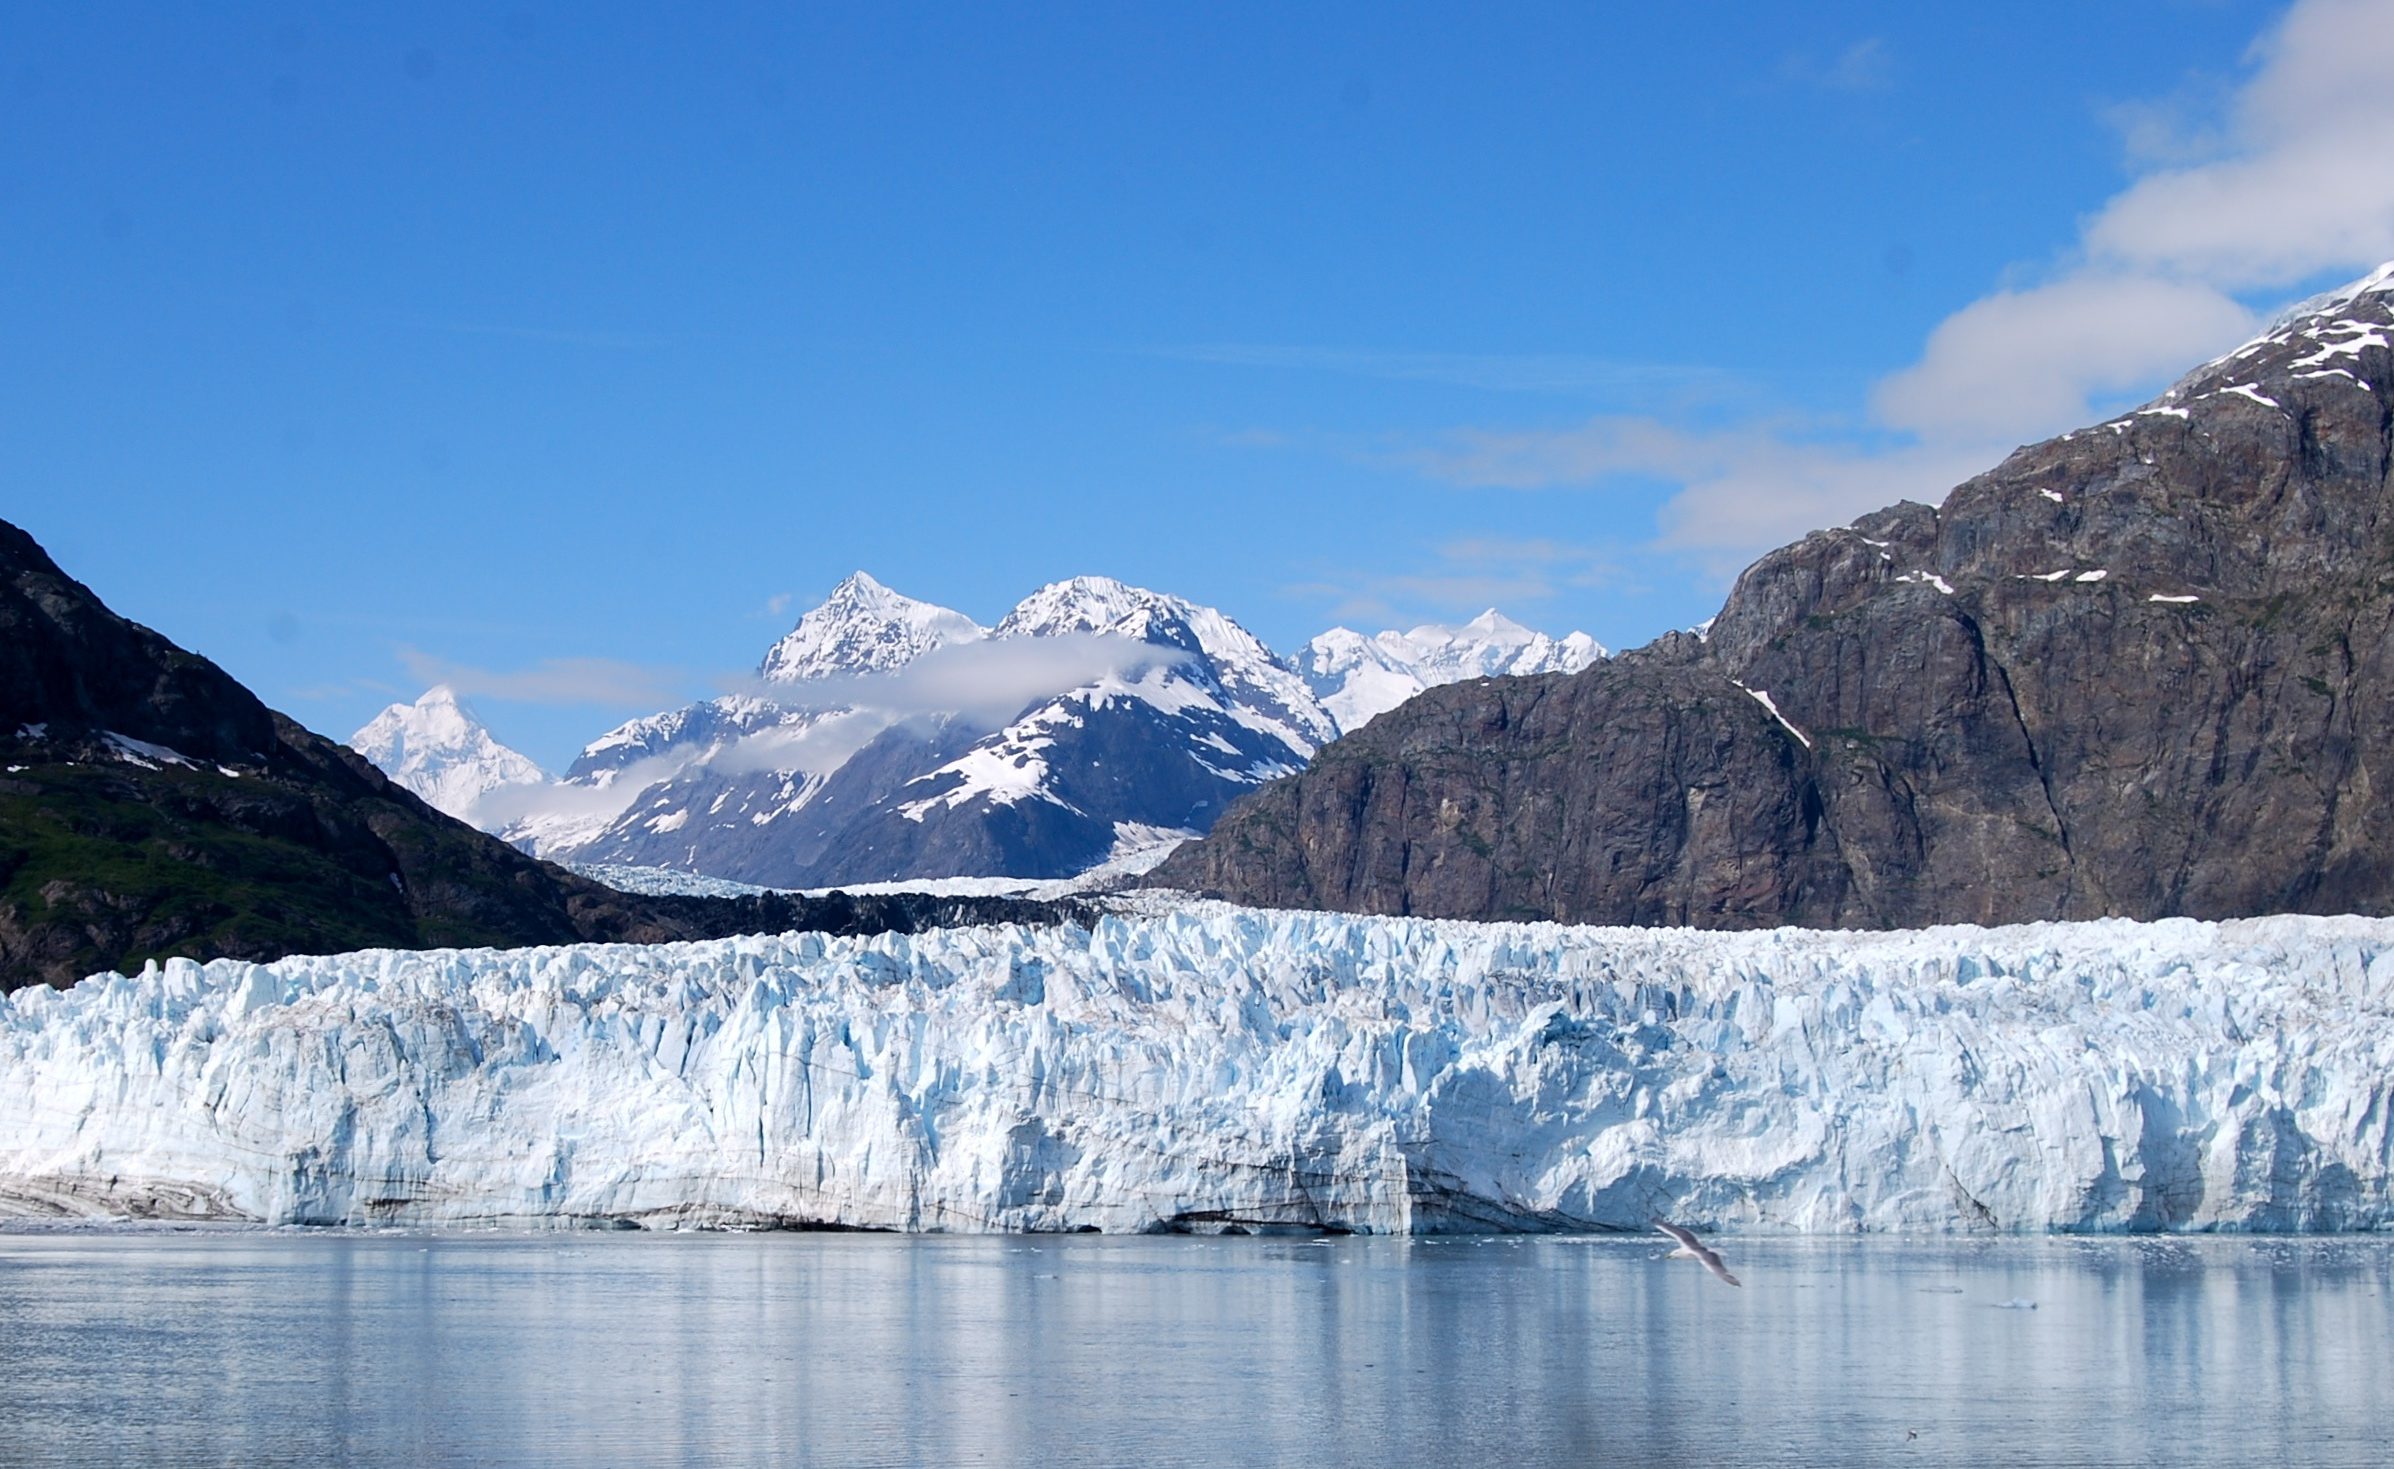 A glacier floating on a lake. The glacier is a wall of ice.